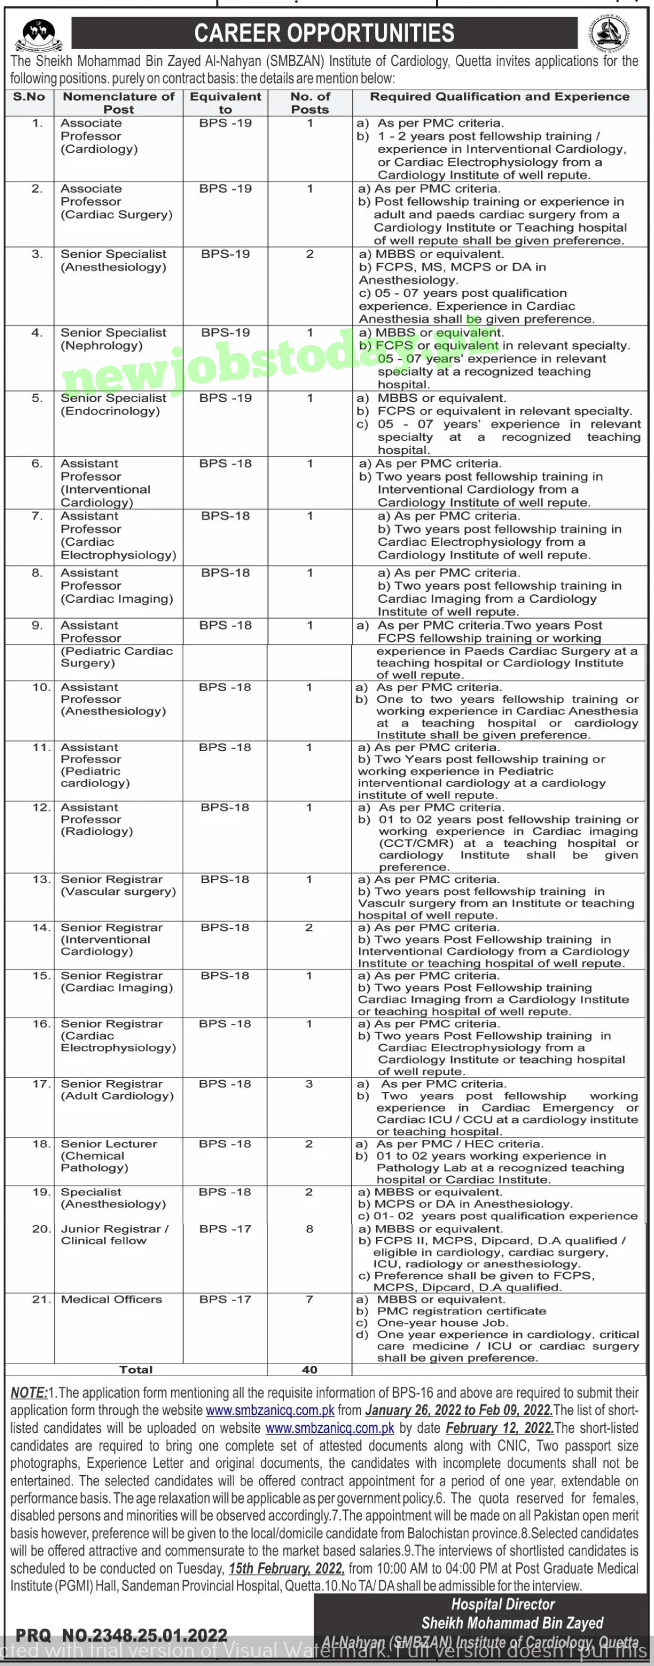 doctors-required-at-smbzan-hospital-quetta-2022